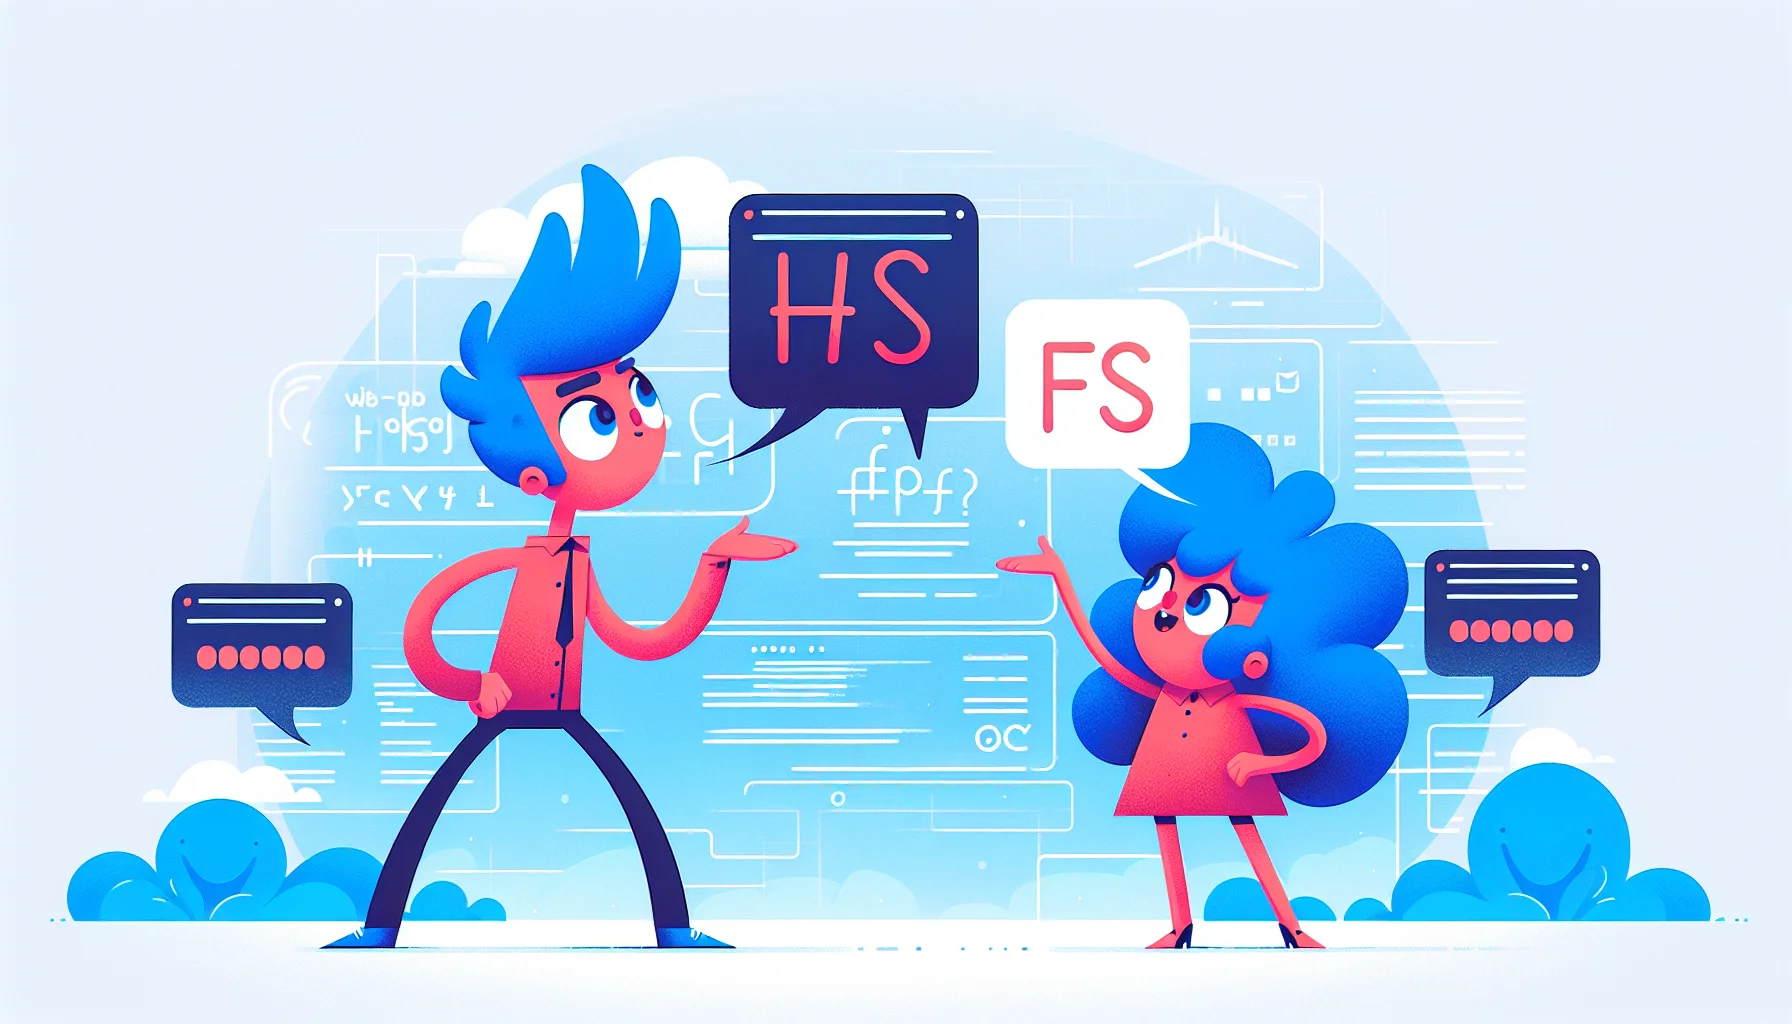 Create a visually engaging and humorous scene using SquareSpace font pairings to promote web hosting. Illustrate a pair of cartoon-style characters with distinct features - one tall and thin with spiky blue hair, representing a Sans Serif font, and the other short and round with curly red hair, embodying a Serif font. Both characters are interacting and having an animated discussion about web hosting benefits, with speech bubbles depicting the benefits in their respective fonts. The overall tone should be light-hearted and enticing, and the background could be a digital world with bright, futuristic colors.